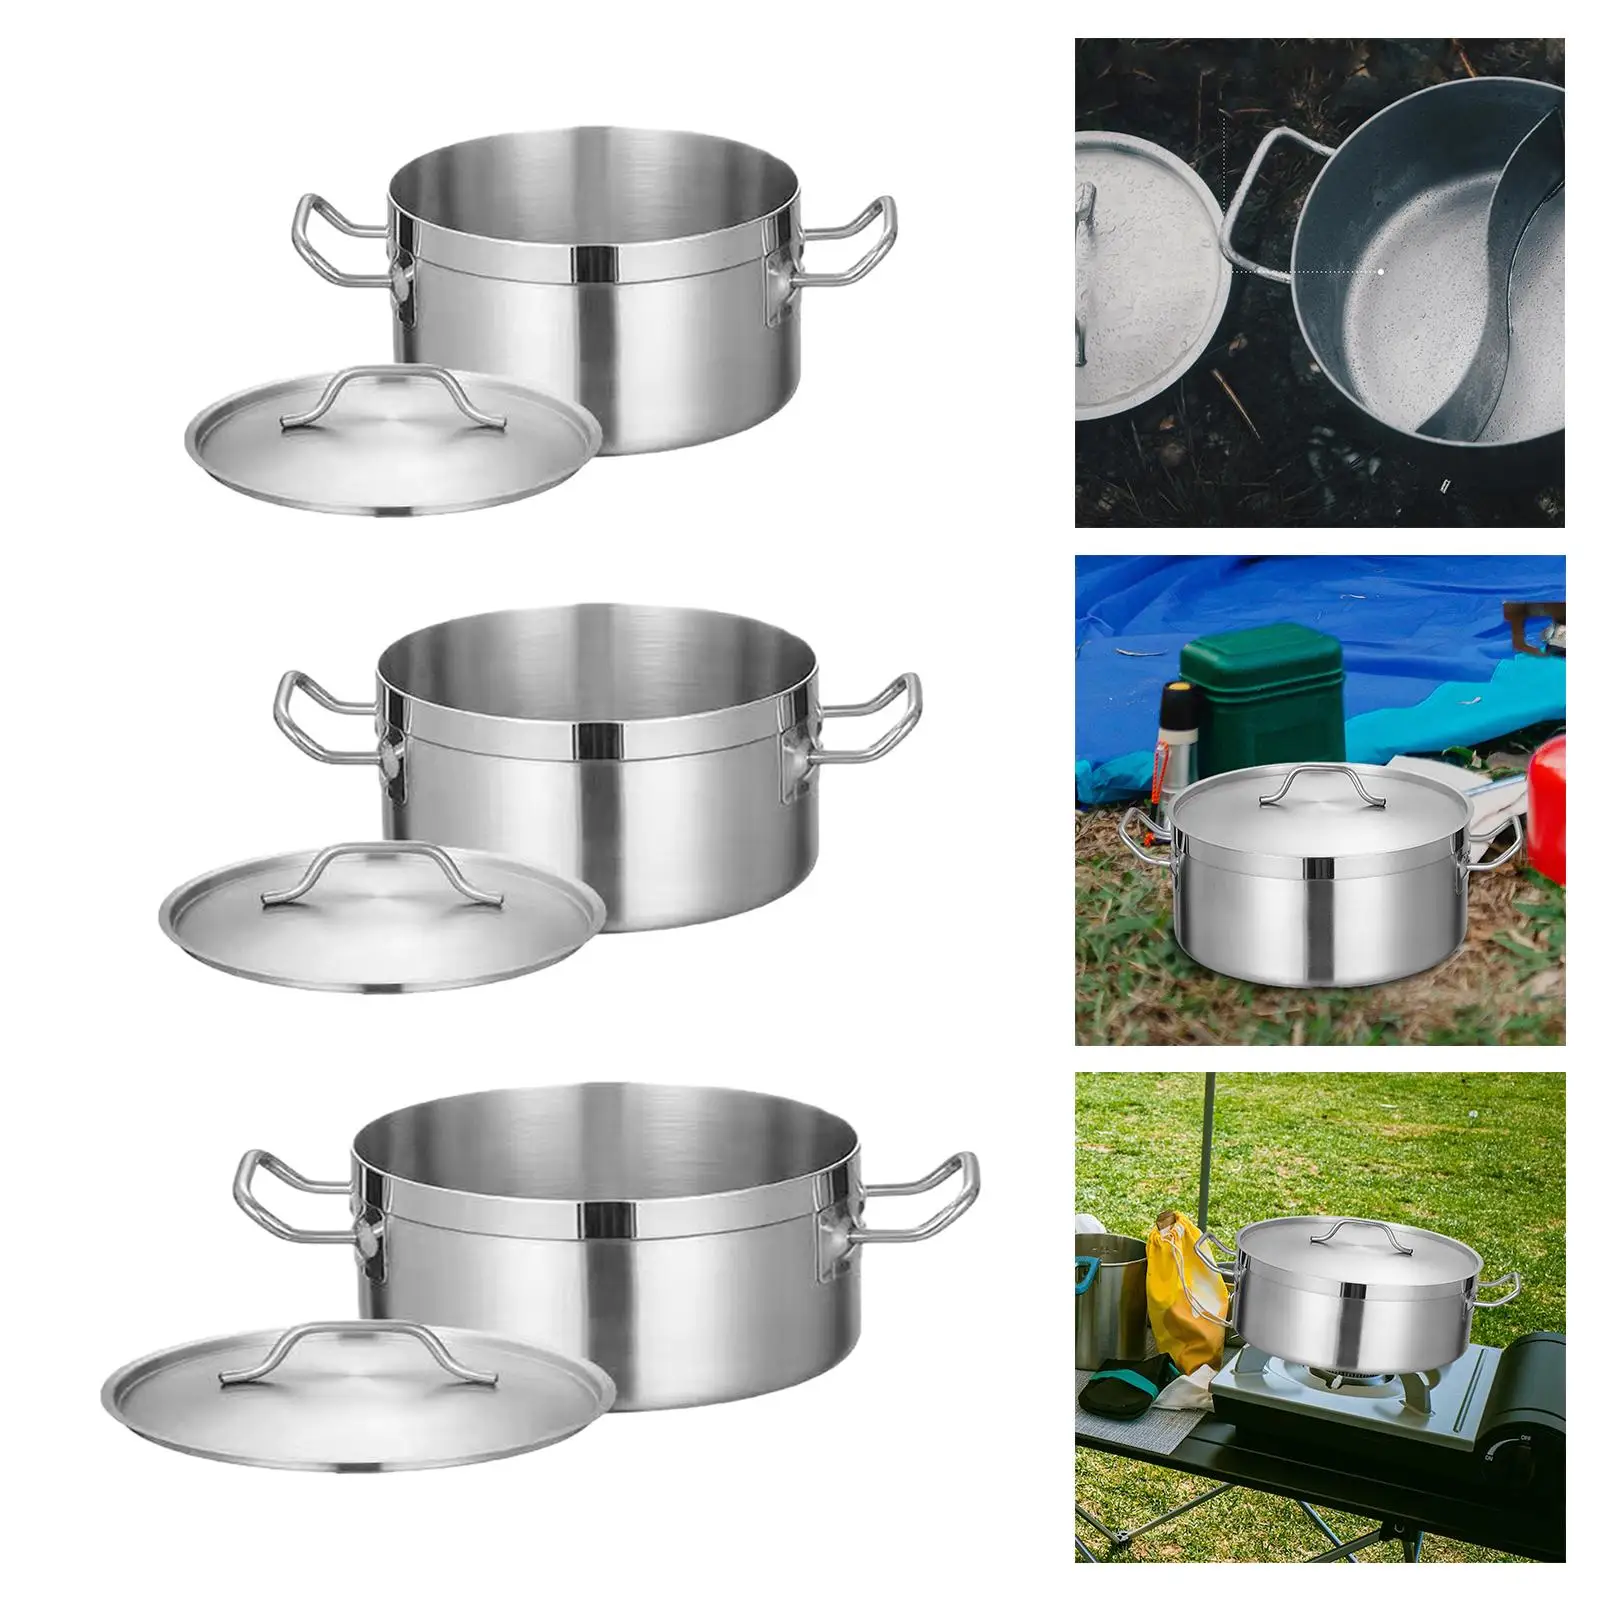 Stainless Steel Stockpot Multipurpose Double Handles Soup Pot Induction Pot for Household Outdoor Camping Commercial Kitchen